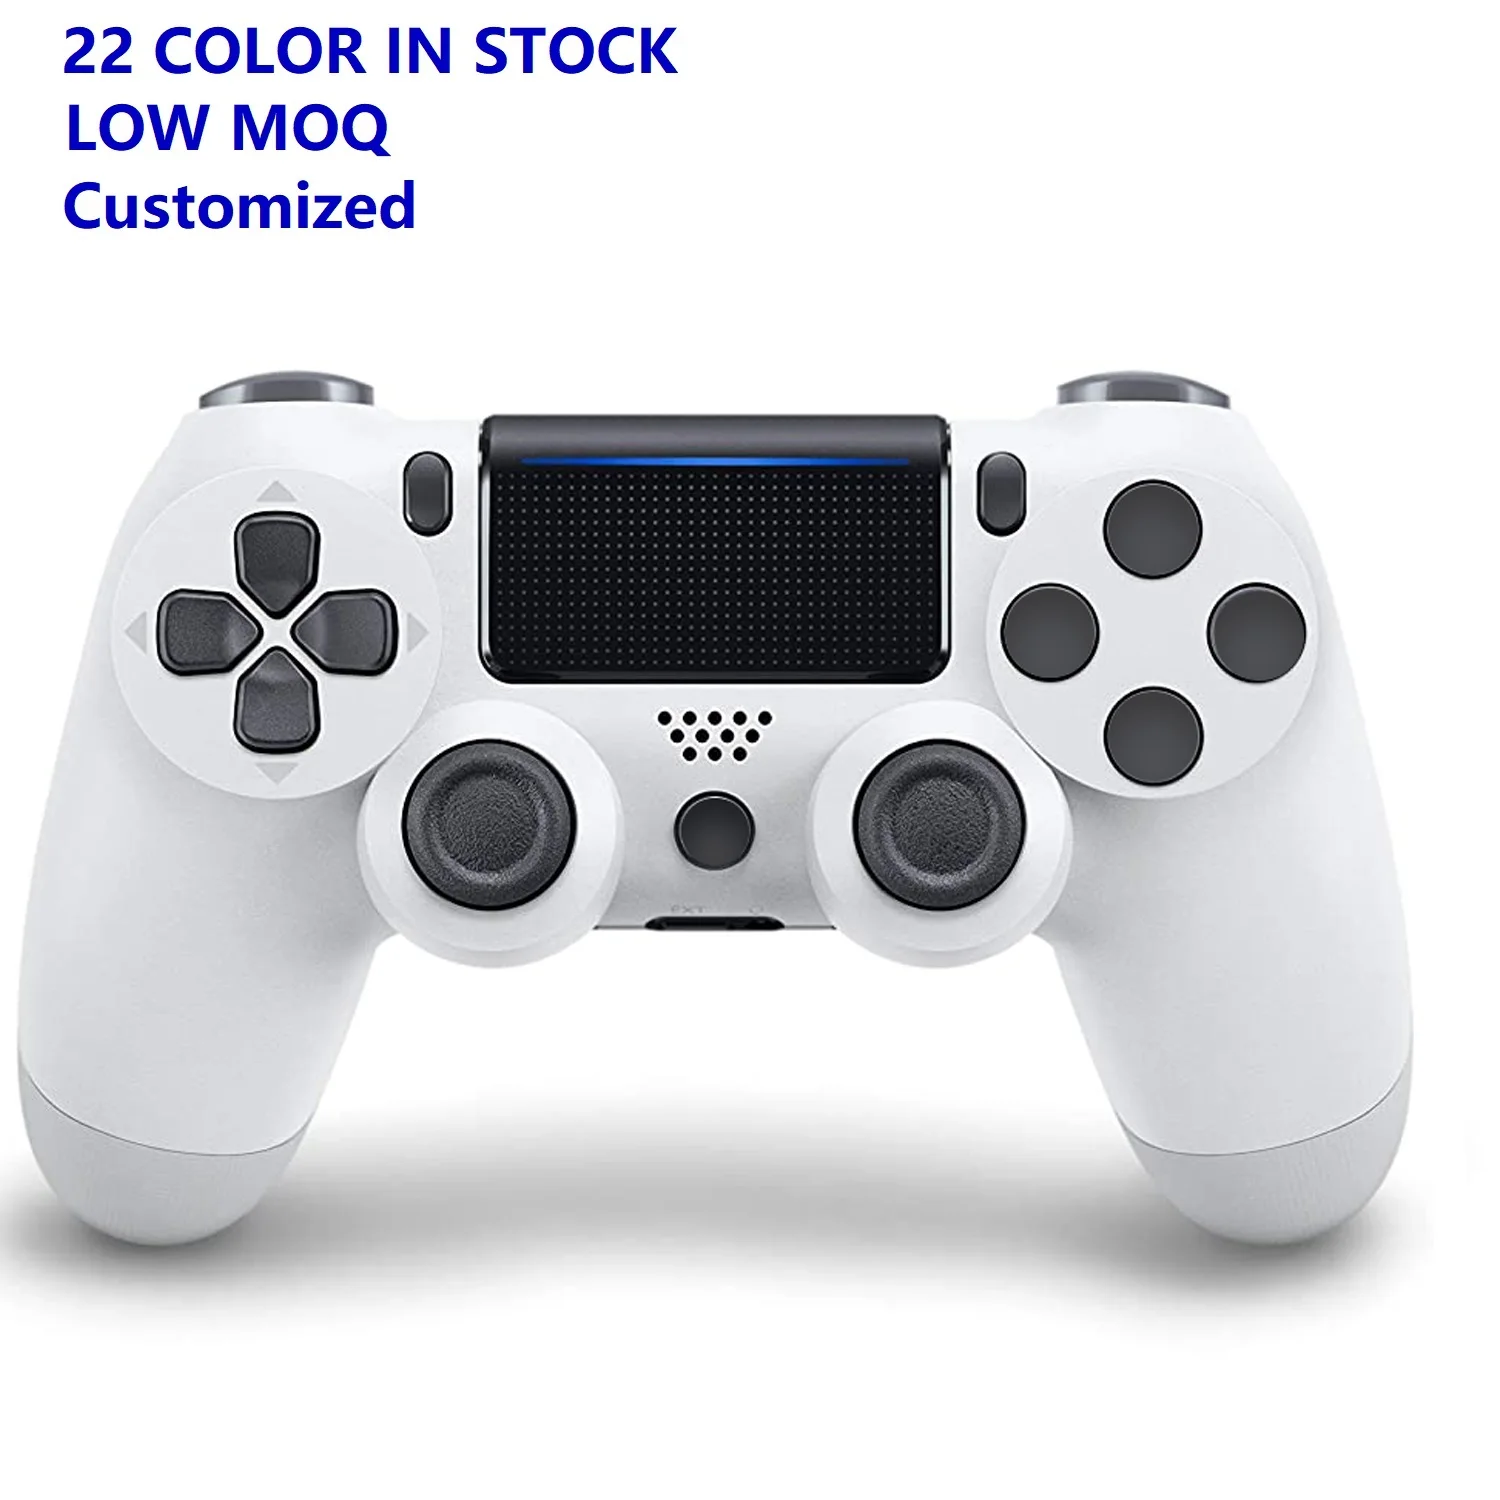 

Factory Price Customize Ps4 Joysticks Game Controller Wireless Play Station 4 Gampepad PS 4 For Playstation 4, 22 colors